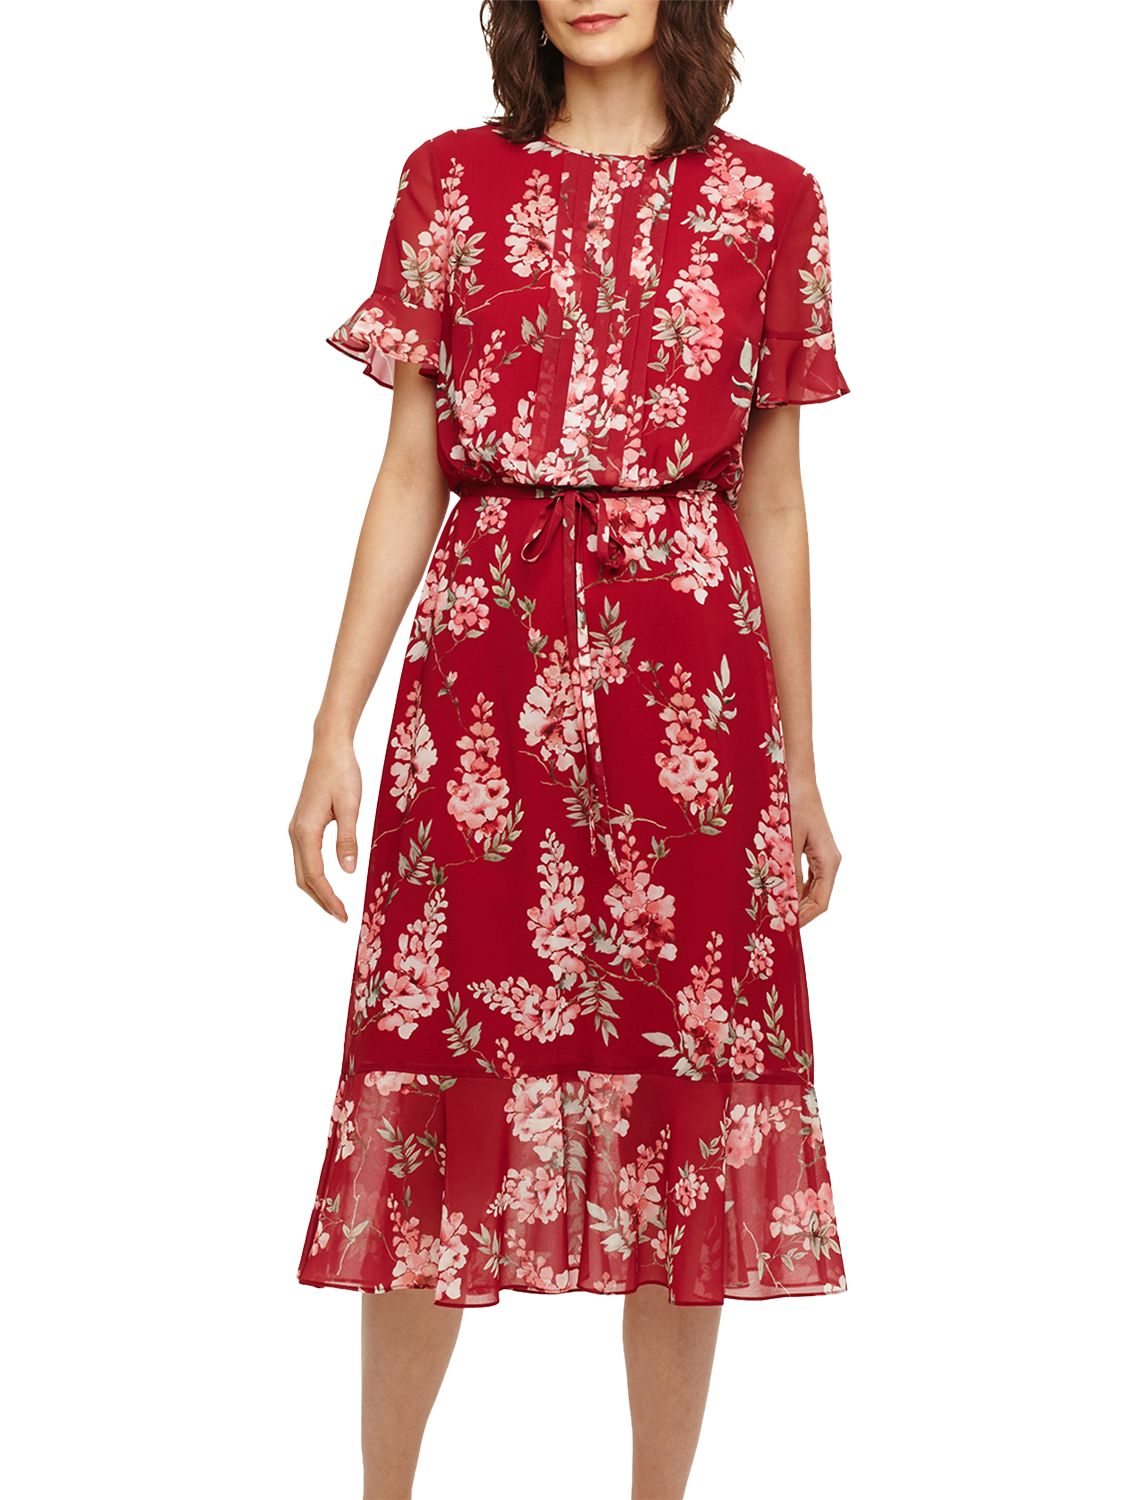 Phase Eight Helia Floral Dress, Bright Lipstick at John Lewis & Partners